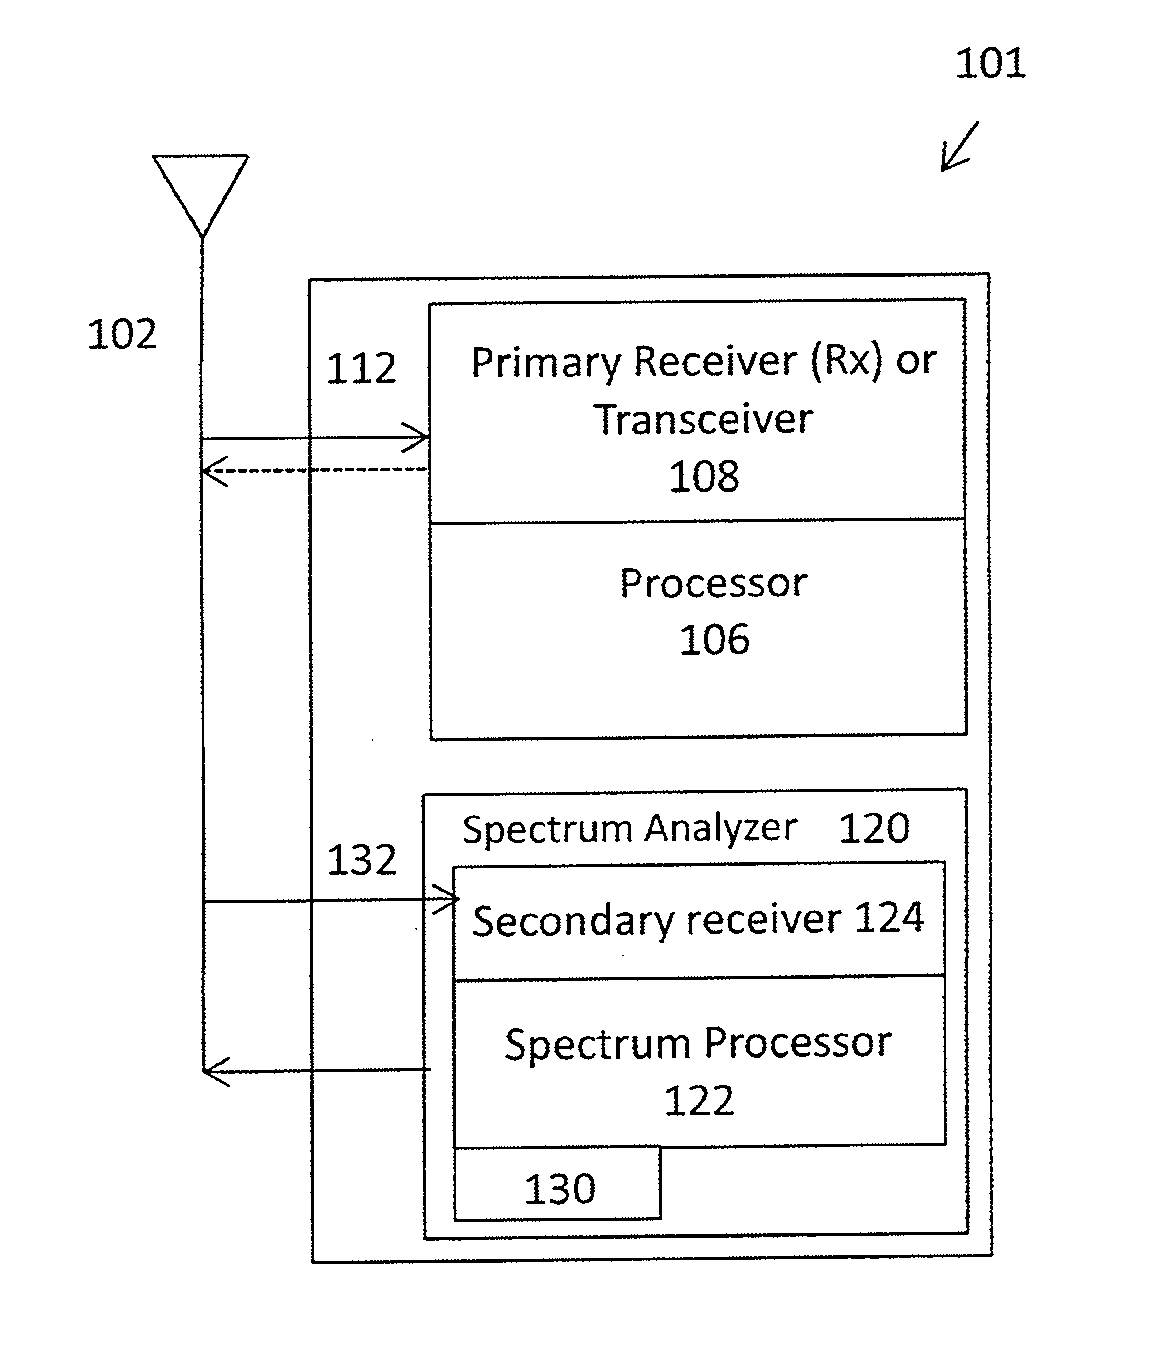 Methods and tools for assisting in the configuration of a wireless radio network